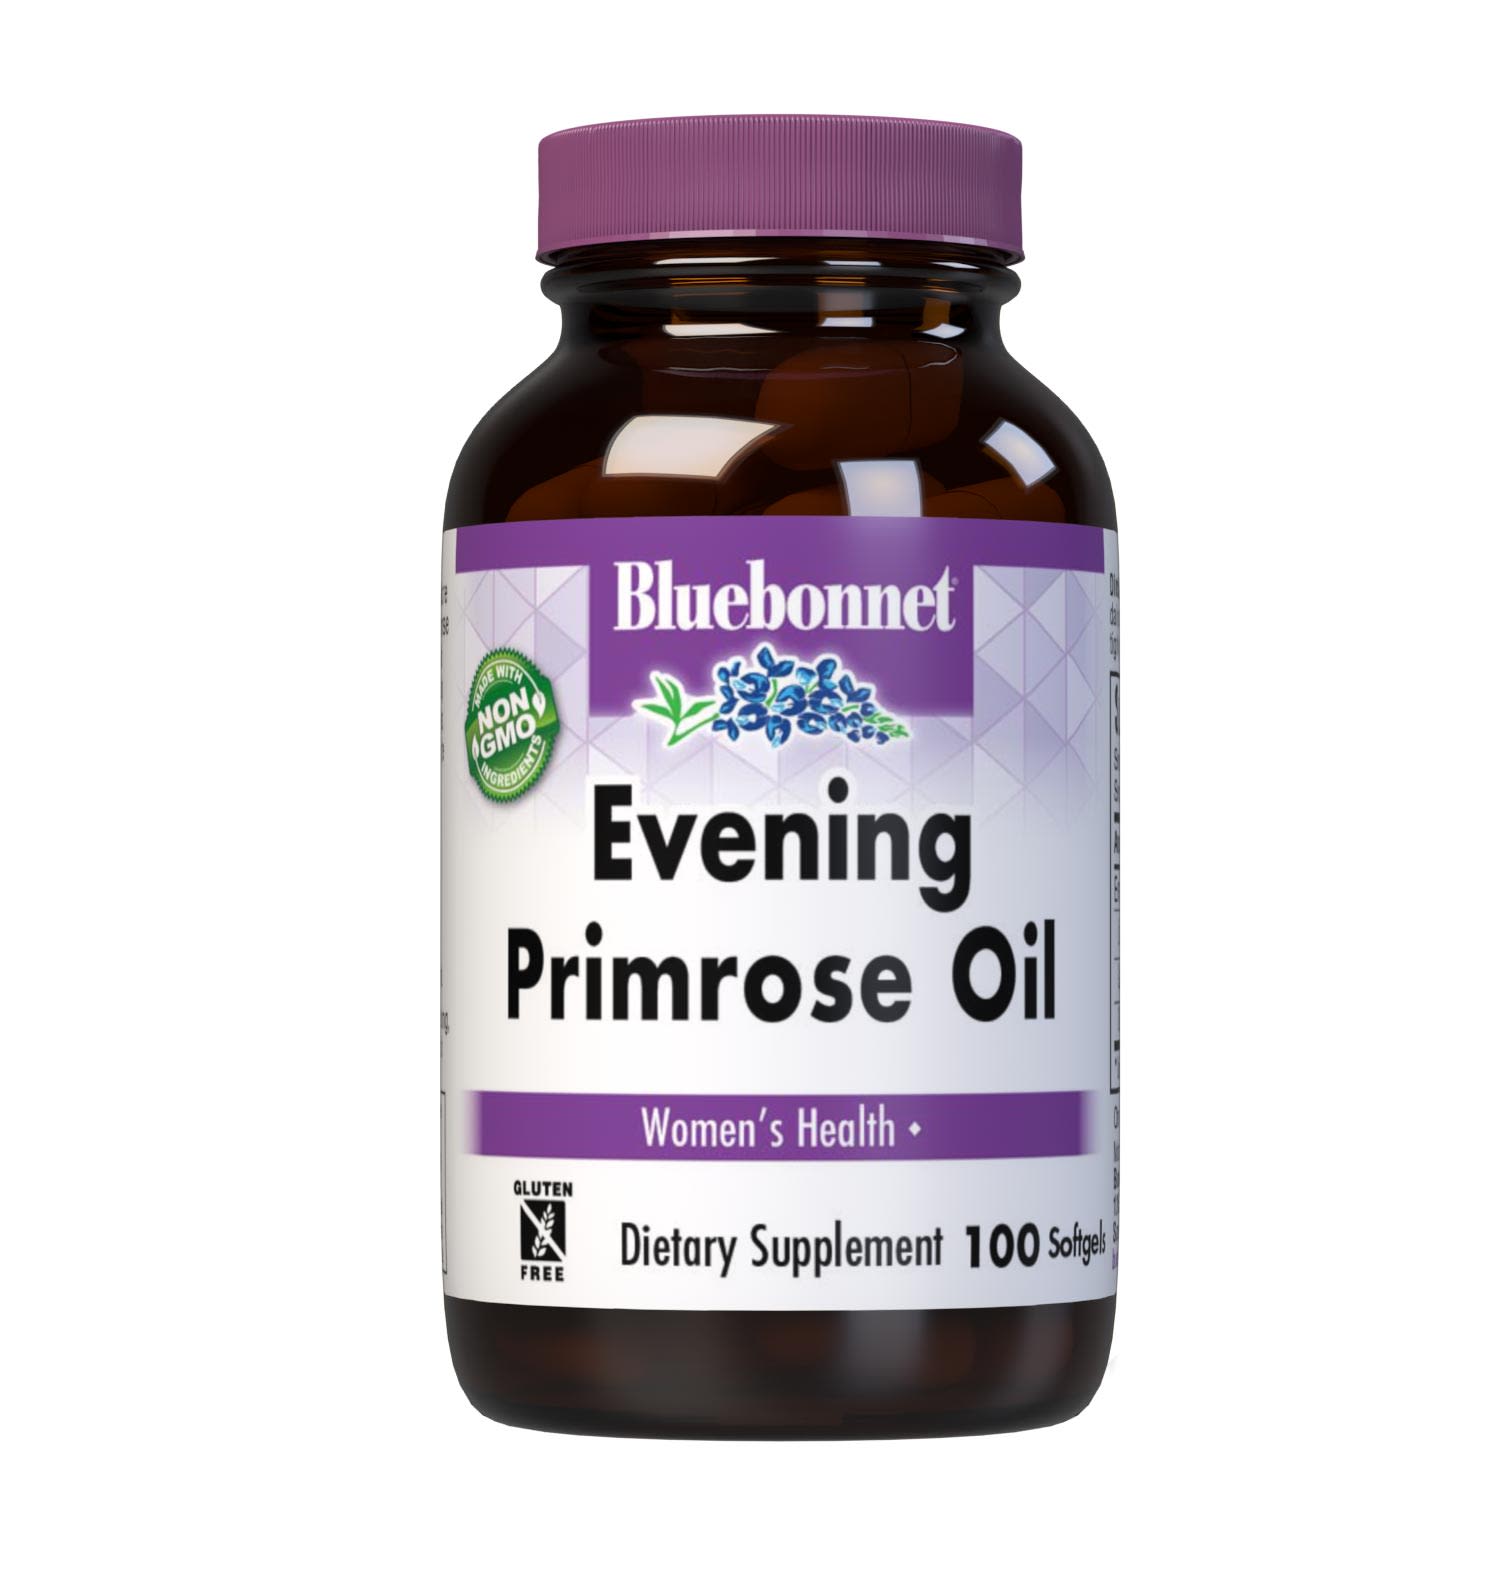 Bluebonnet’s Evening Primrose Oil 500 mg 100 Softgels contain an oil from the seed of the evening primrose plant. Our oil is squeezed by a process known as cold pressing, thus providing essential fatty acids including GLA which may help support women's health. No heat, solvents or chemicals (i.e., hexane free) are used in the extraction process. #size_100 count